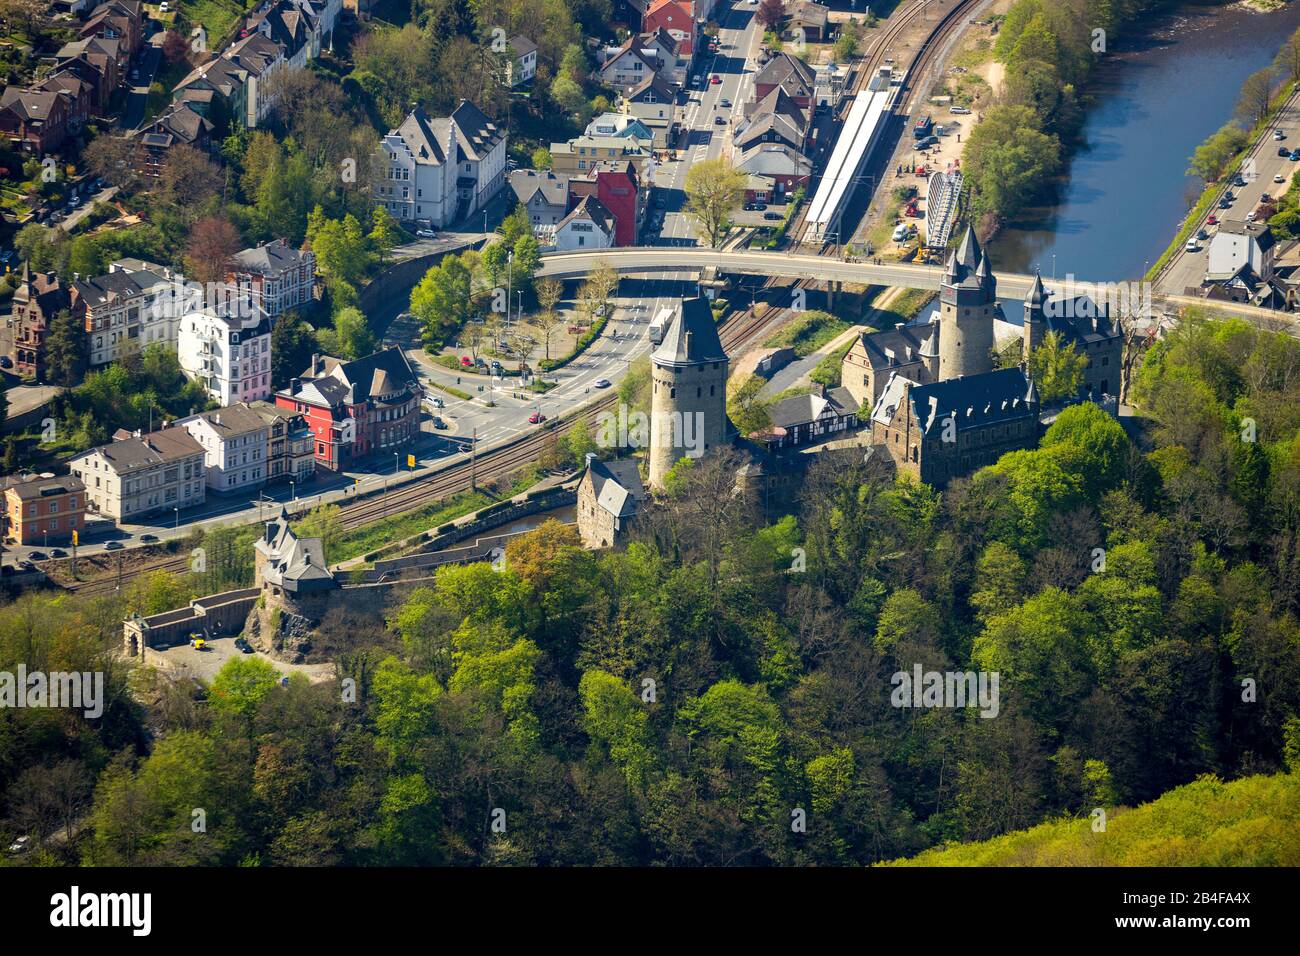 Aerial view of the Jugendherberge Burg Altena, which is located on a mountain spur of the Klusenberg in the town of Altena an der Lenne in North Rhine-Westphalia in the Sauerland in the federal state of North Rhine-Westphalia, Germany. Stock Photo